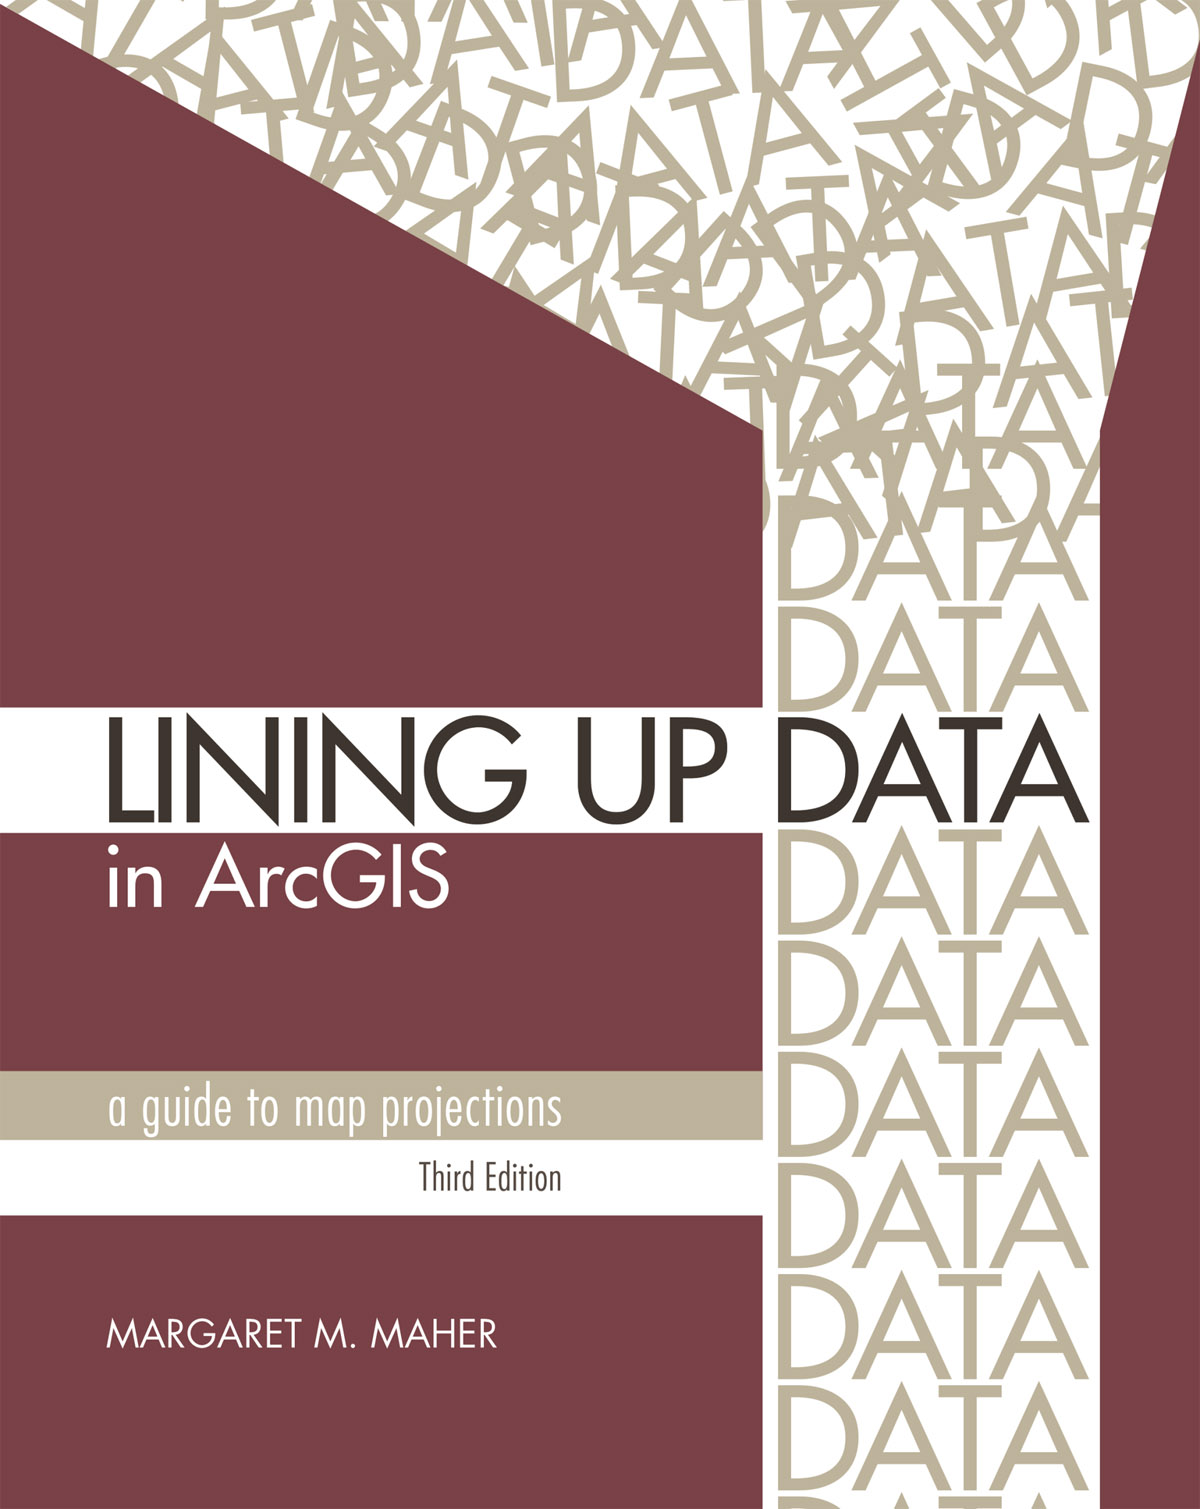 Esri announces the publication of Lining Up Data in ArcGIS: A Guide to Map Projections, Third Edition.